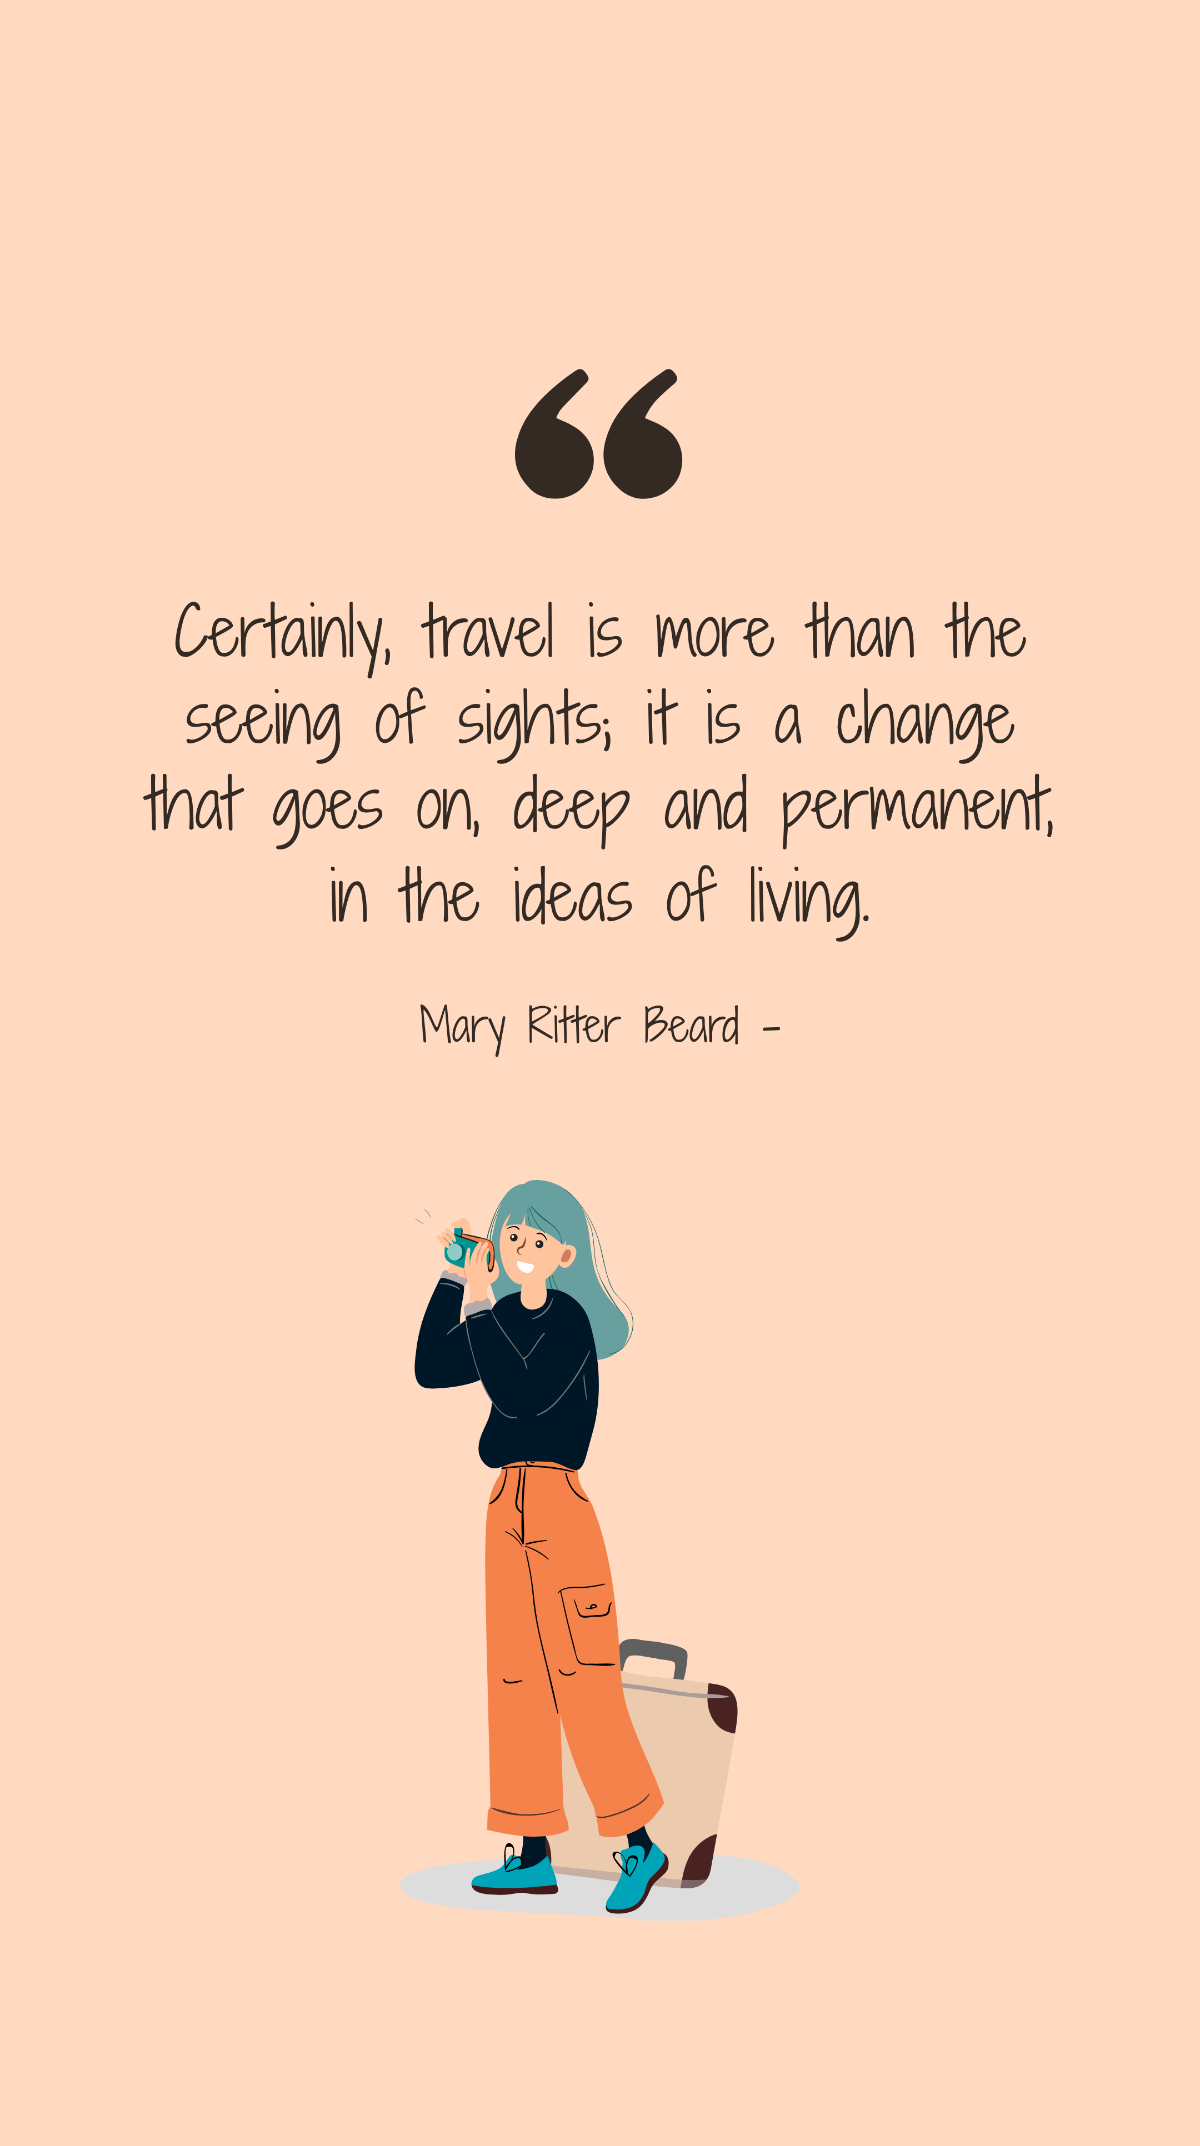 Mary Ritter Beard - Certainly, travel is more than the seeing of sights; it is a change that goes on, deep and permanent, in the ideas of living. Template